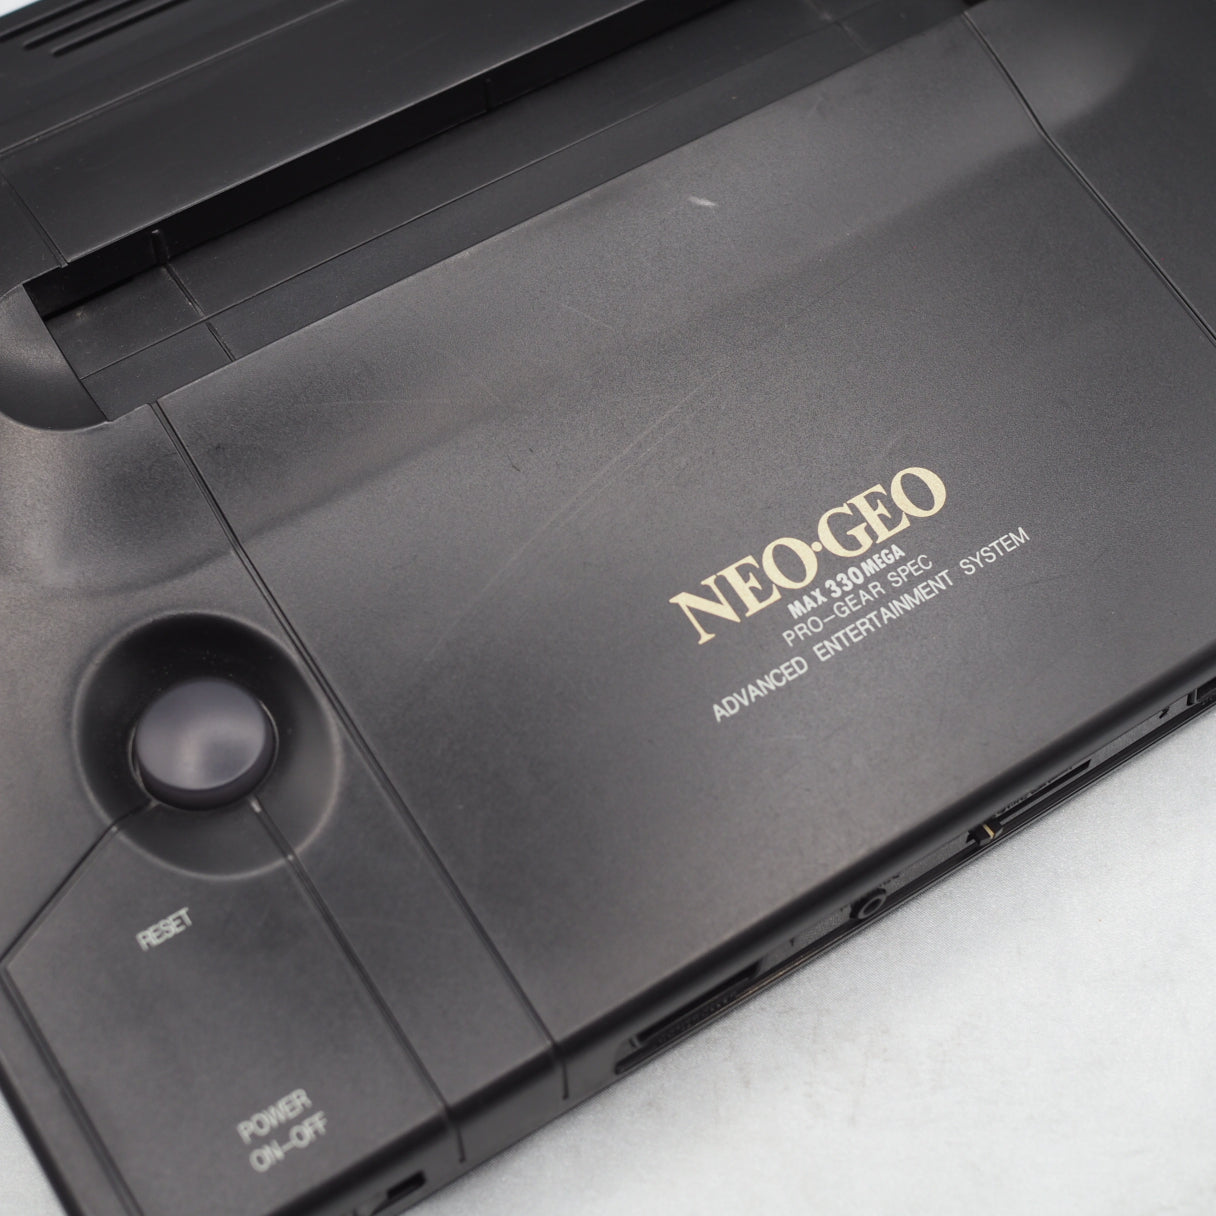 NEO GEO AES Console System Boxed [serial number match] No.2